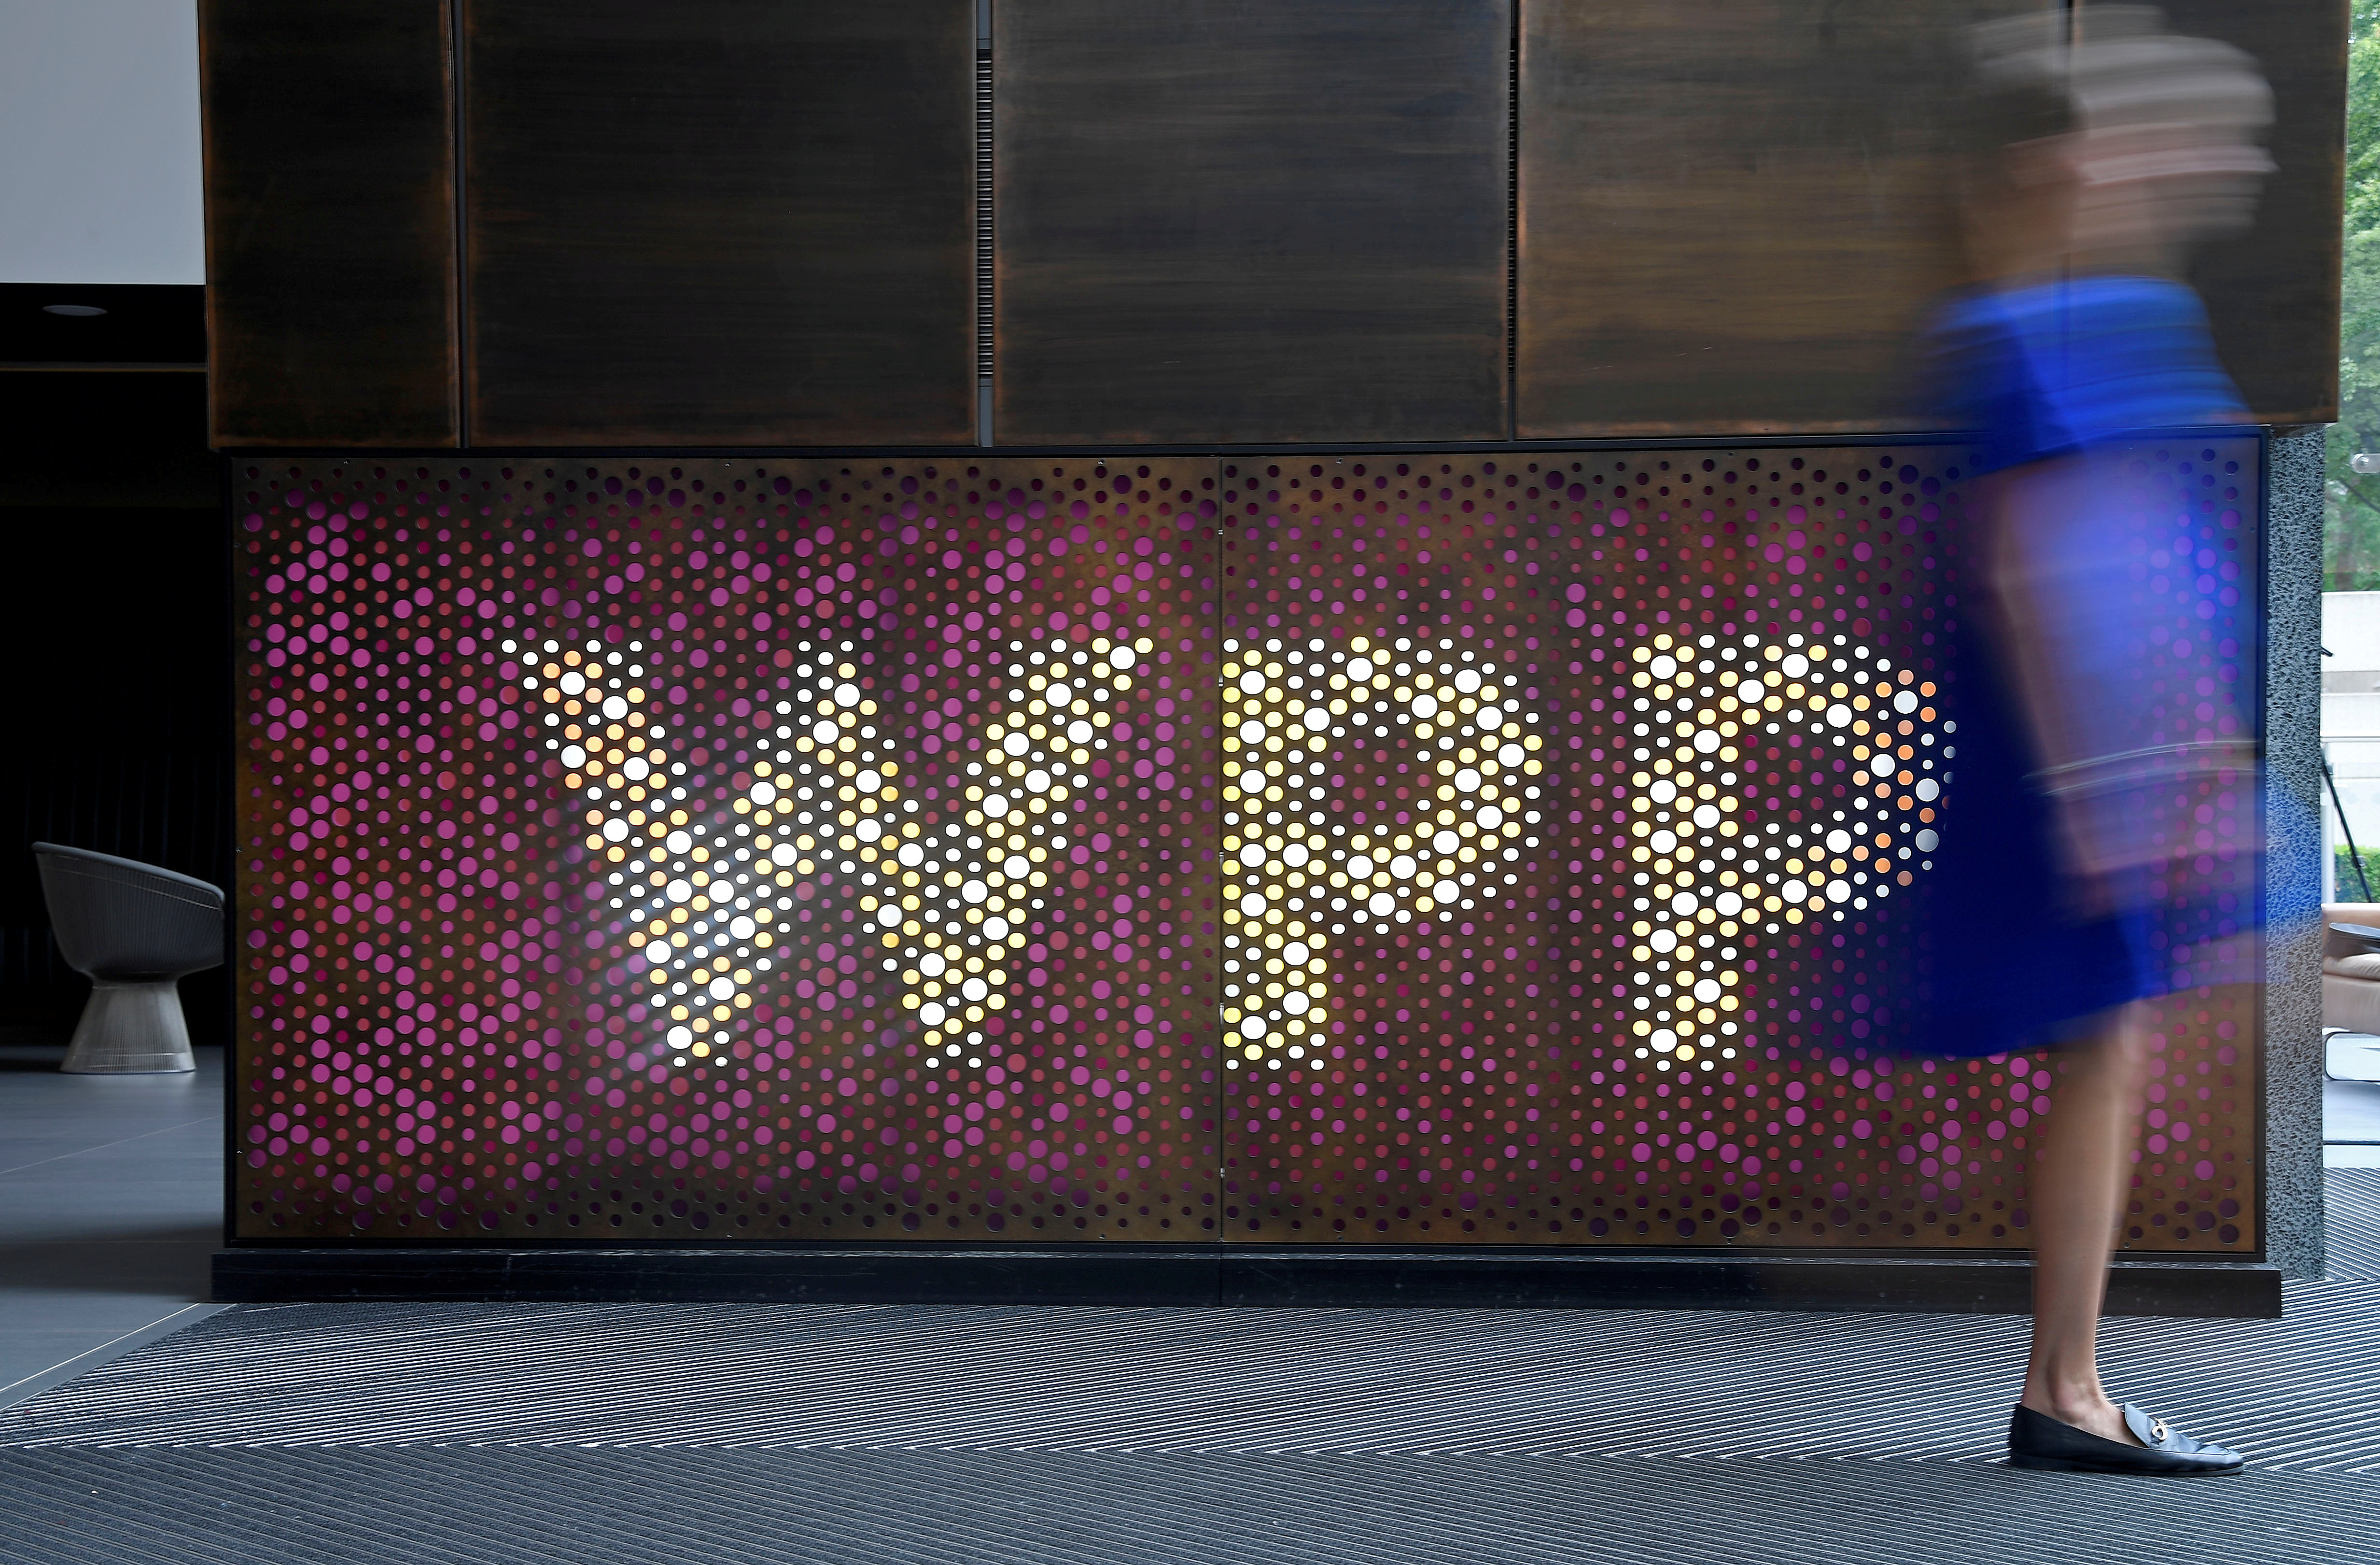 Branding signage is seen for WPP, the world's biggest advertising and marketing company, at their offices in London